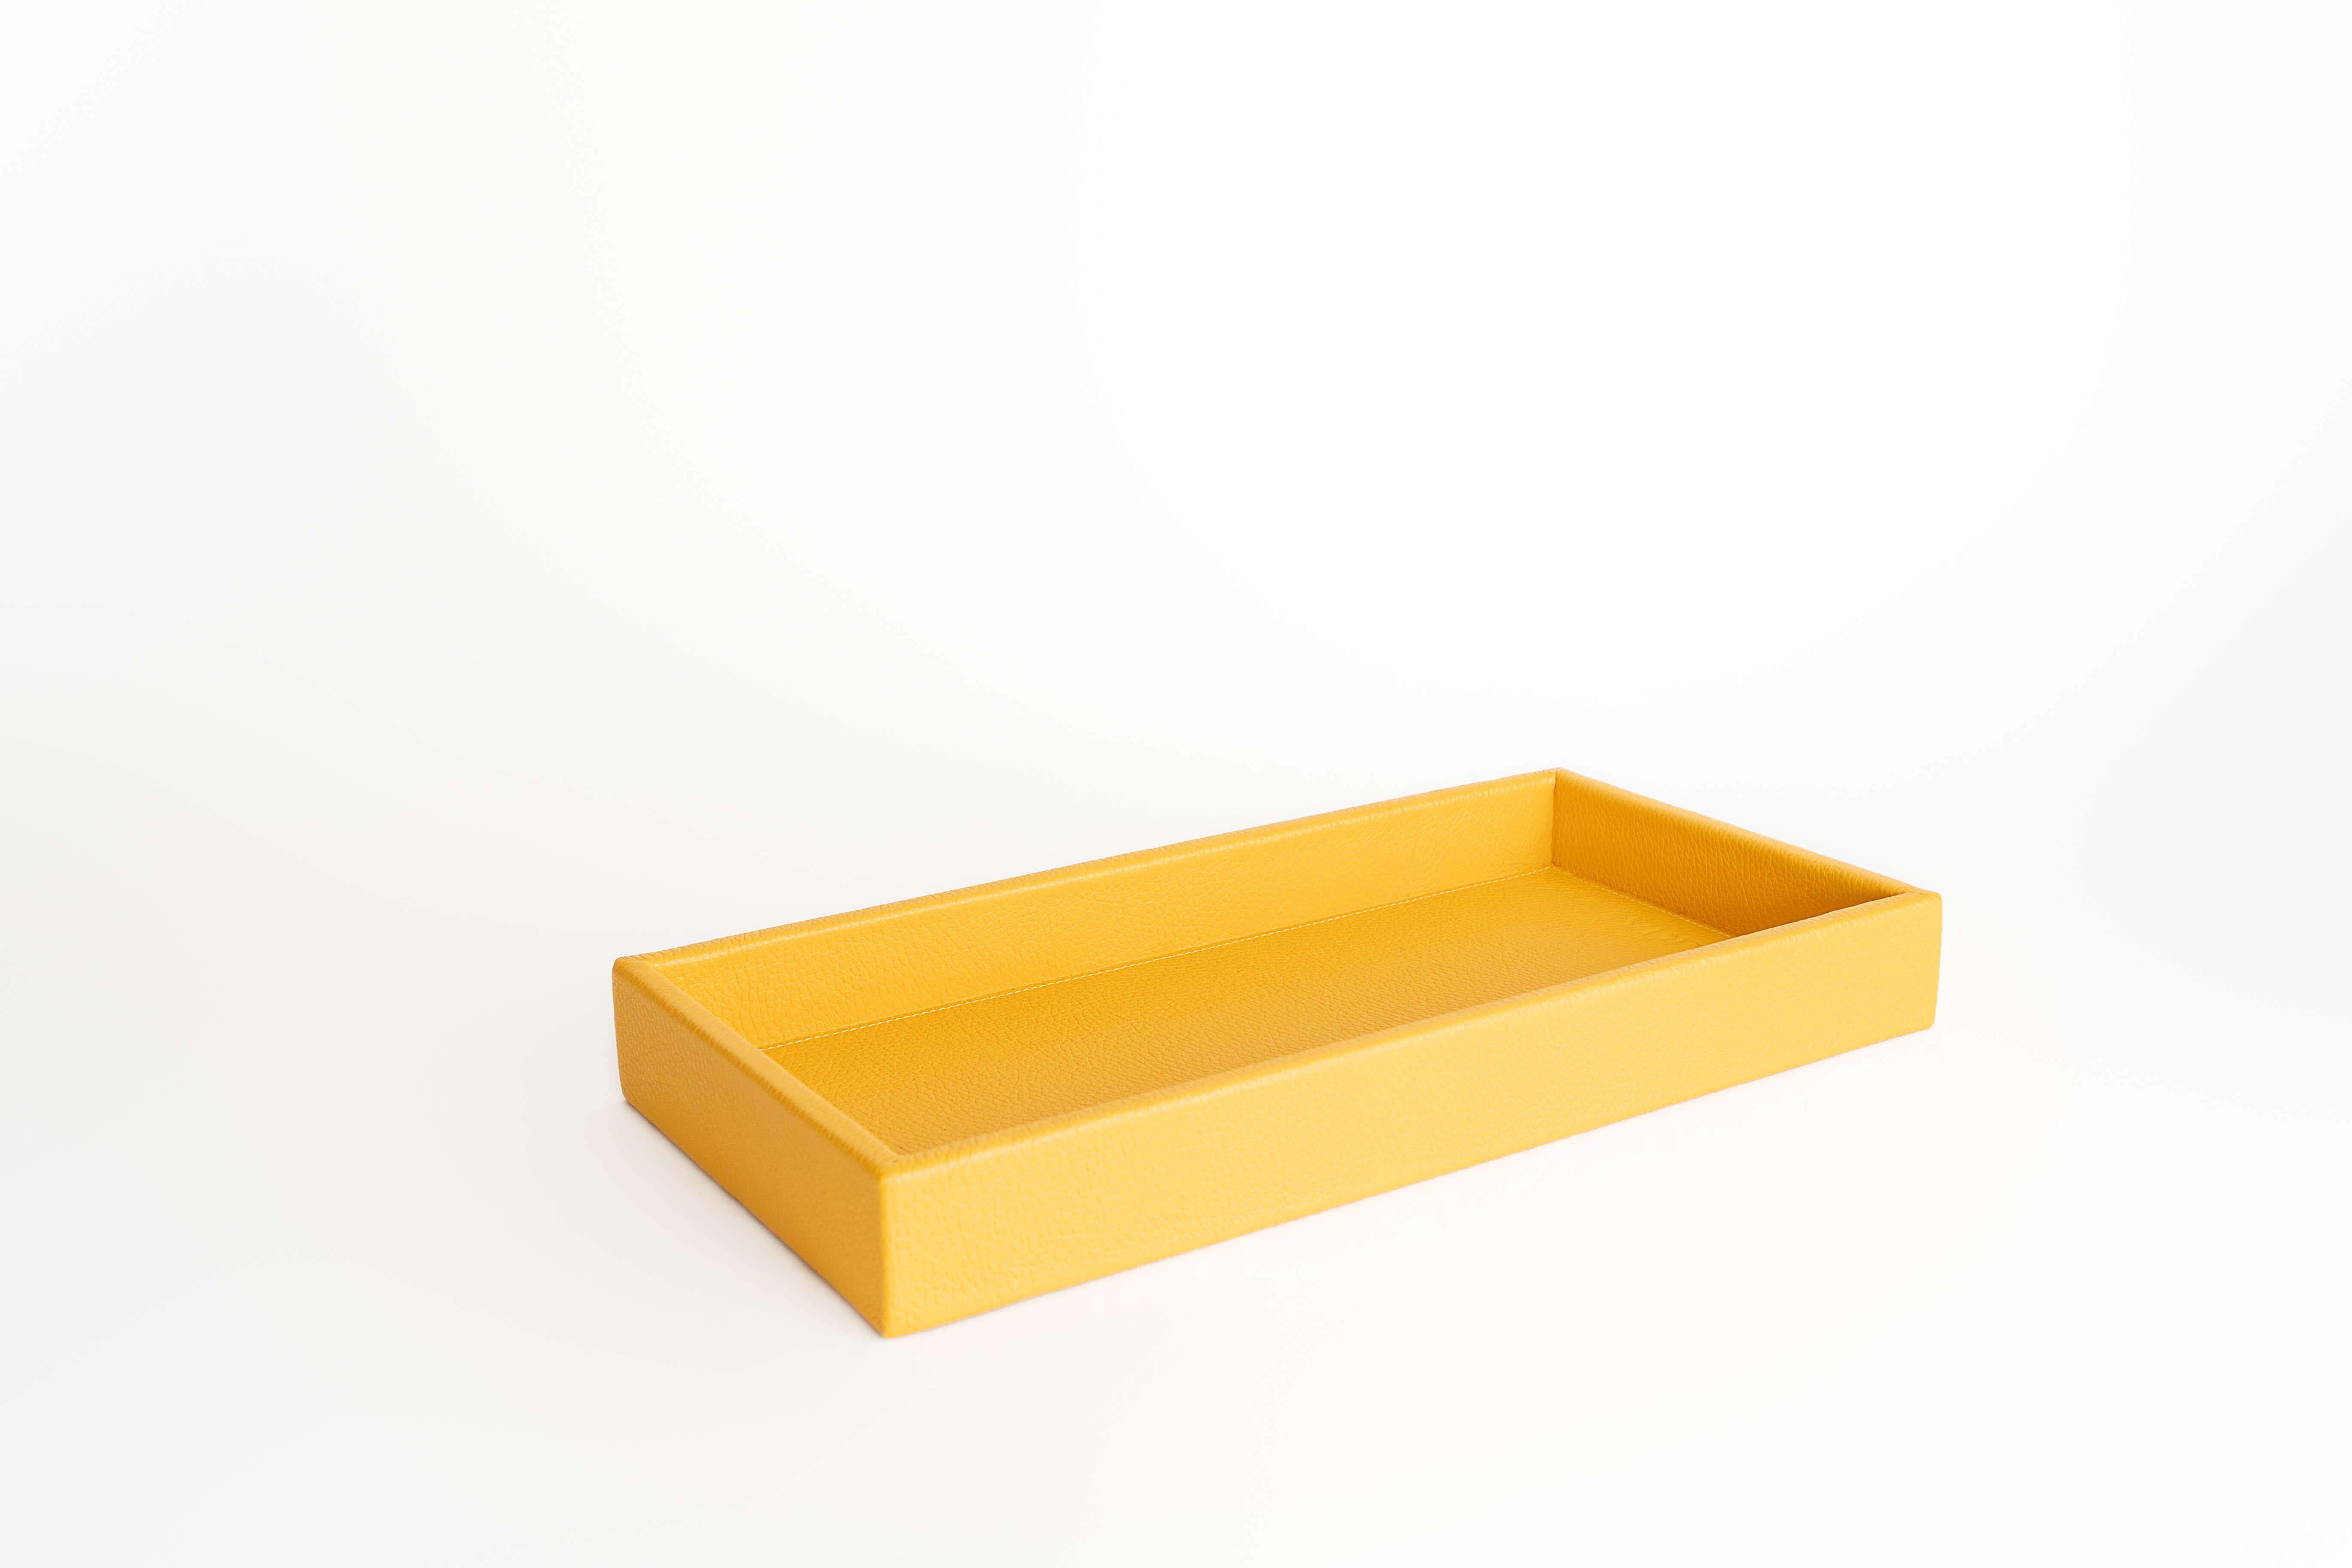 Monochrome Collection Trays

For different uses, the line of Monochrome Trays can be used separately or as a set. Their sizes are customizable, so use your creativity to build a unique ambience, varying colors and shapes. Ideal for desk office,